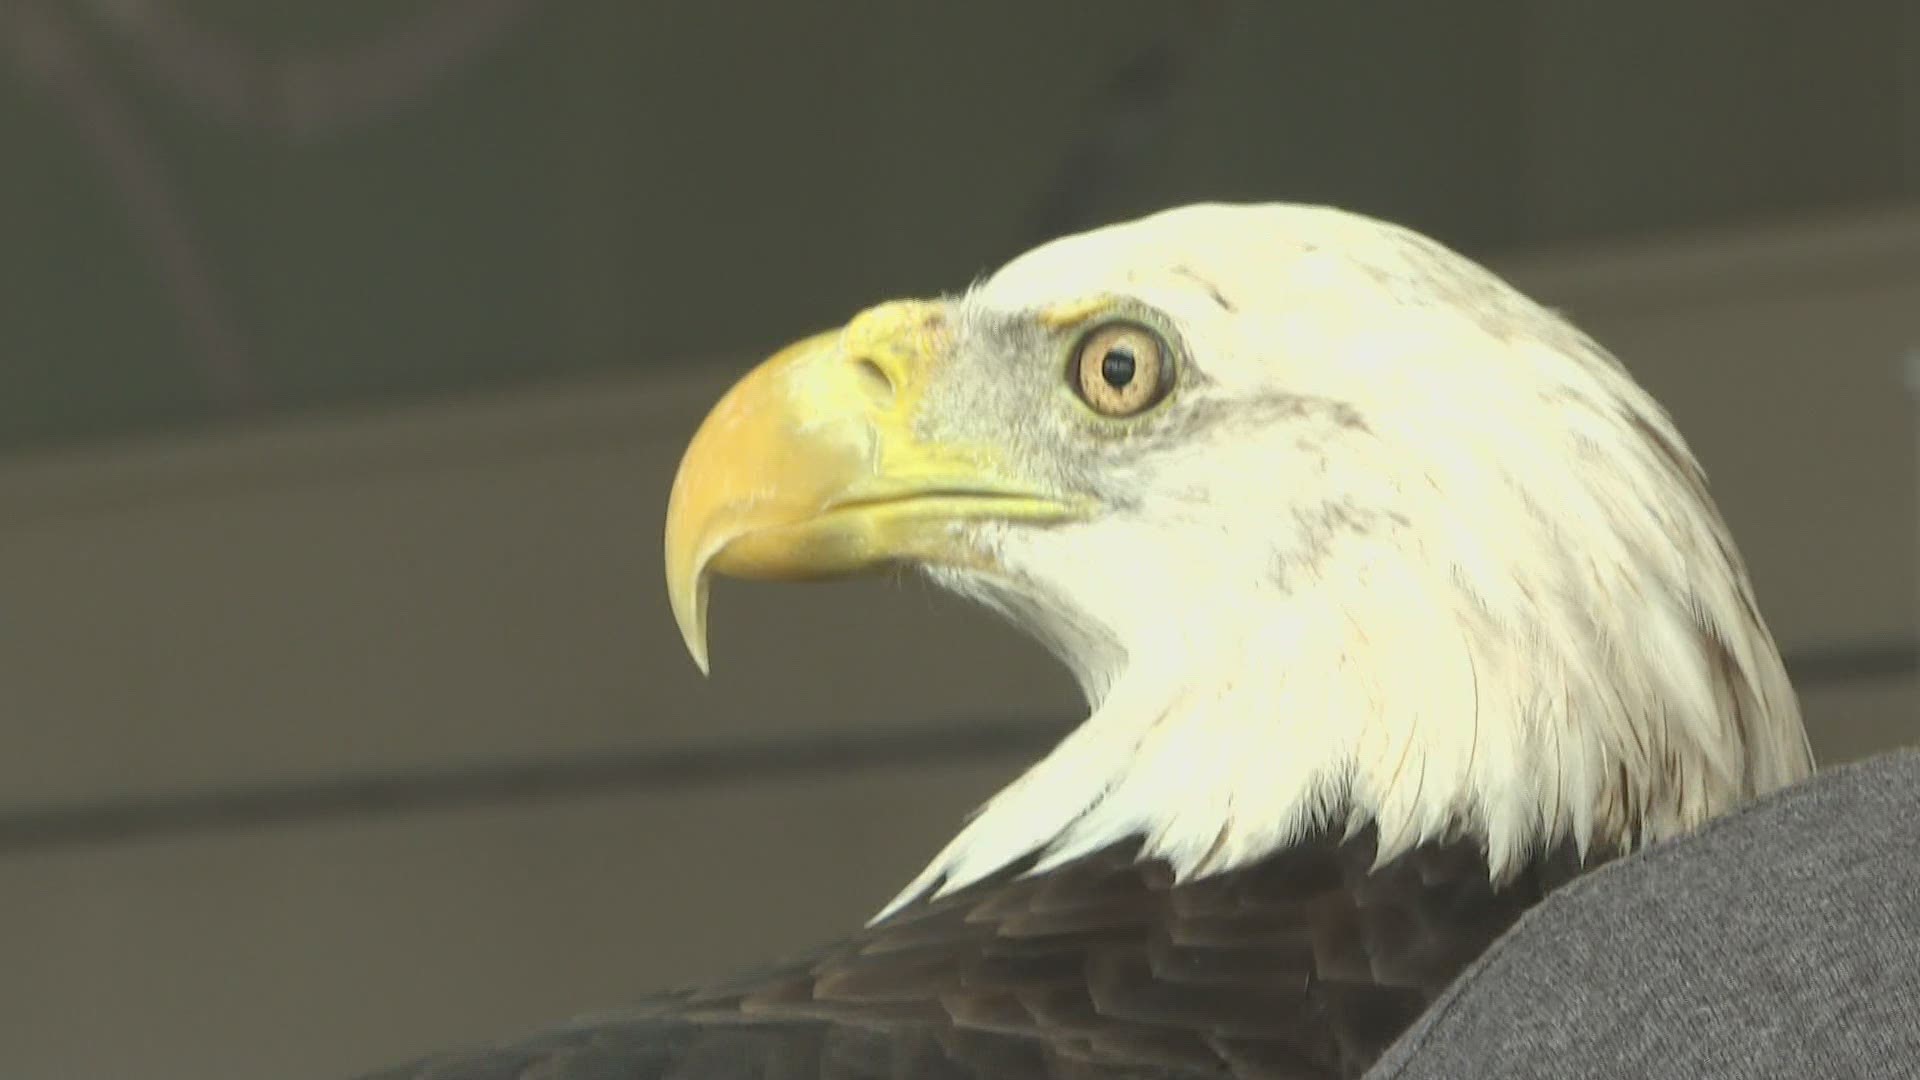 Hot temperatures in Atlanta force adjustment of Thunder the bald Eagle's ride home Monday